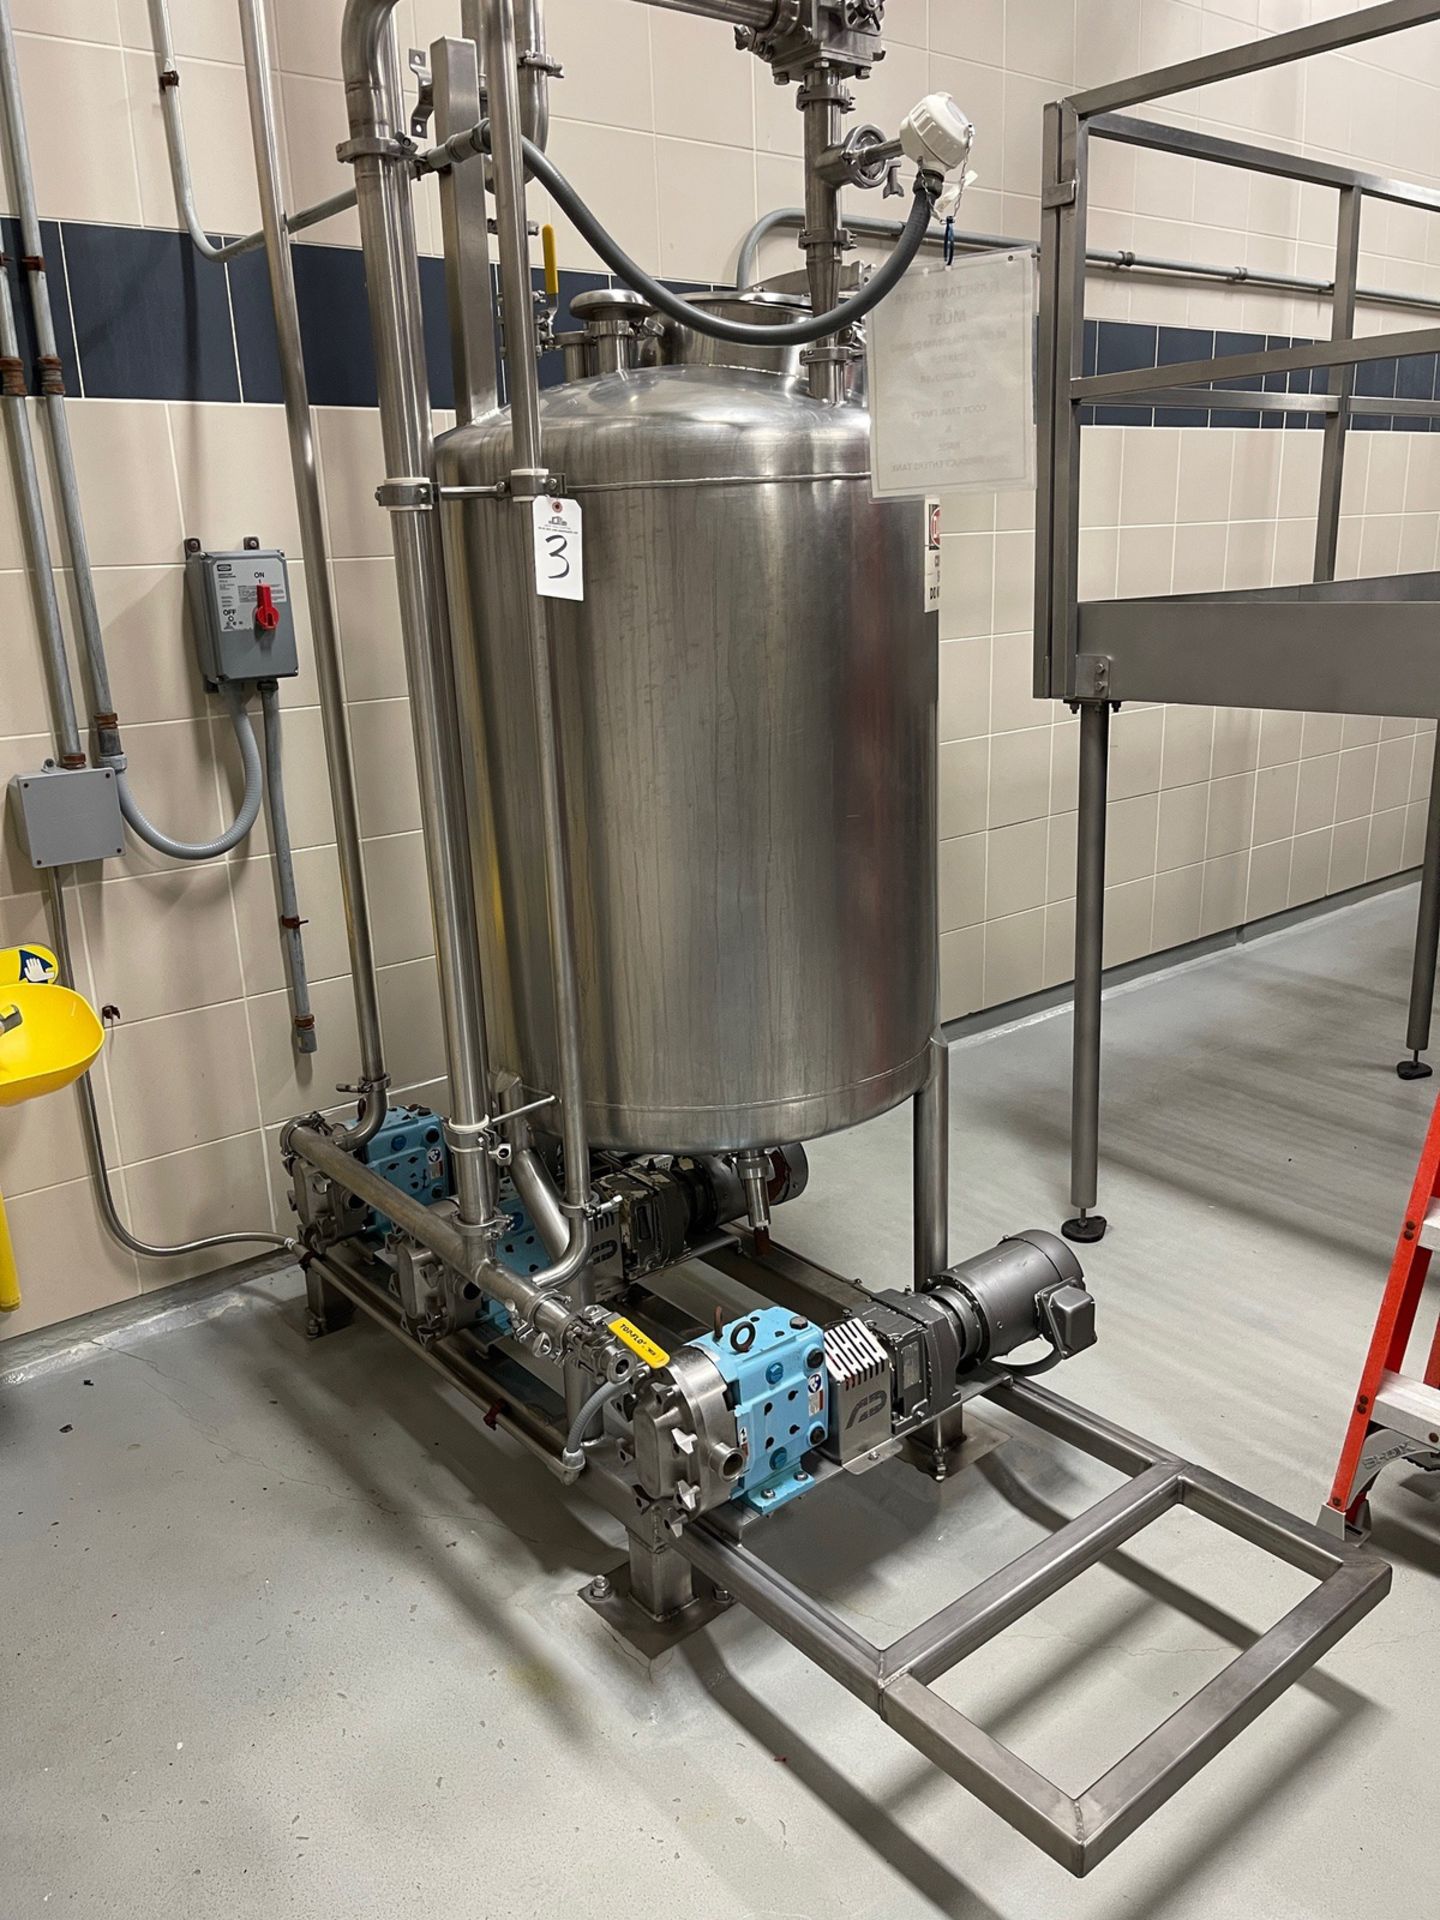 2013 Mixer Direct 120 Gallon Stainless Steel with (3) 2014 SPX 030 U2 Onboard Posit | Rig Fee $600